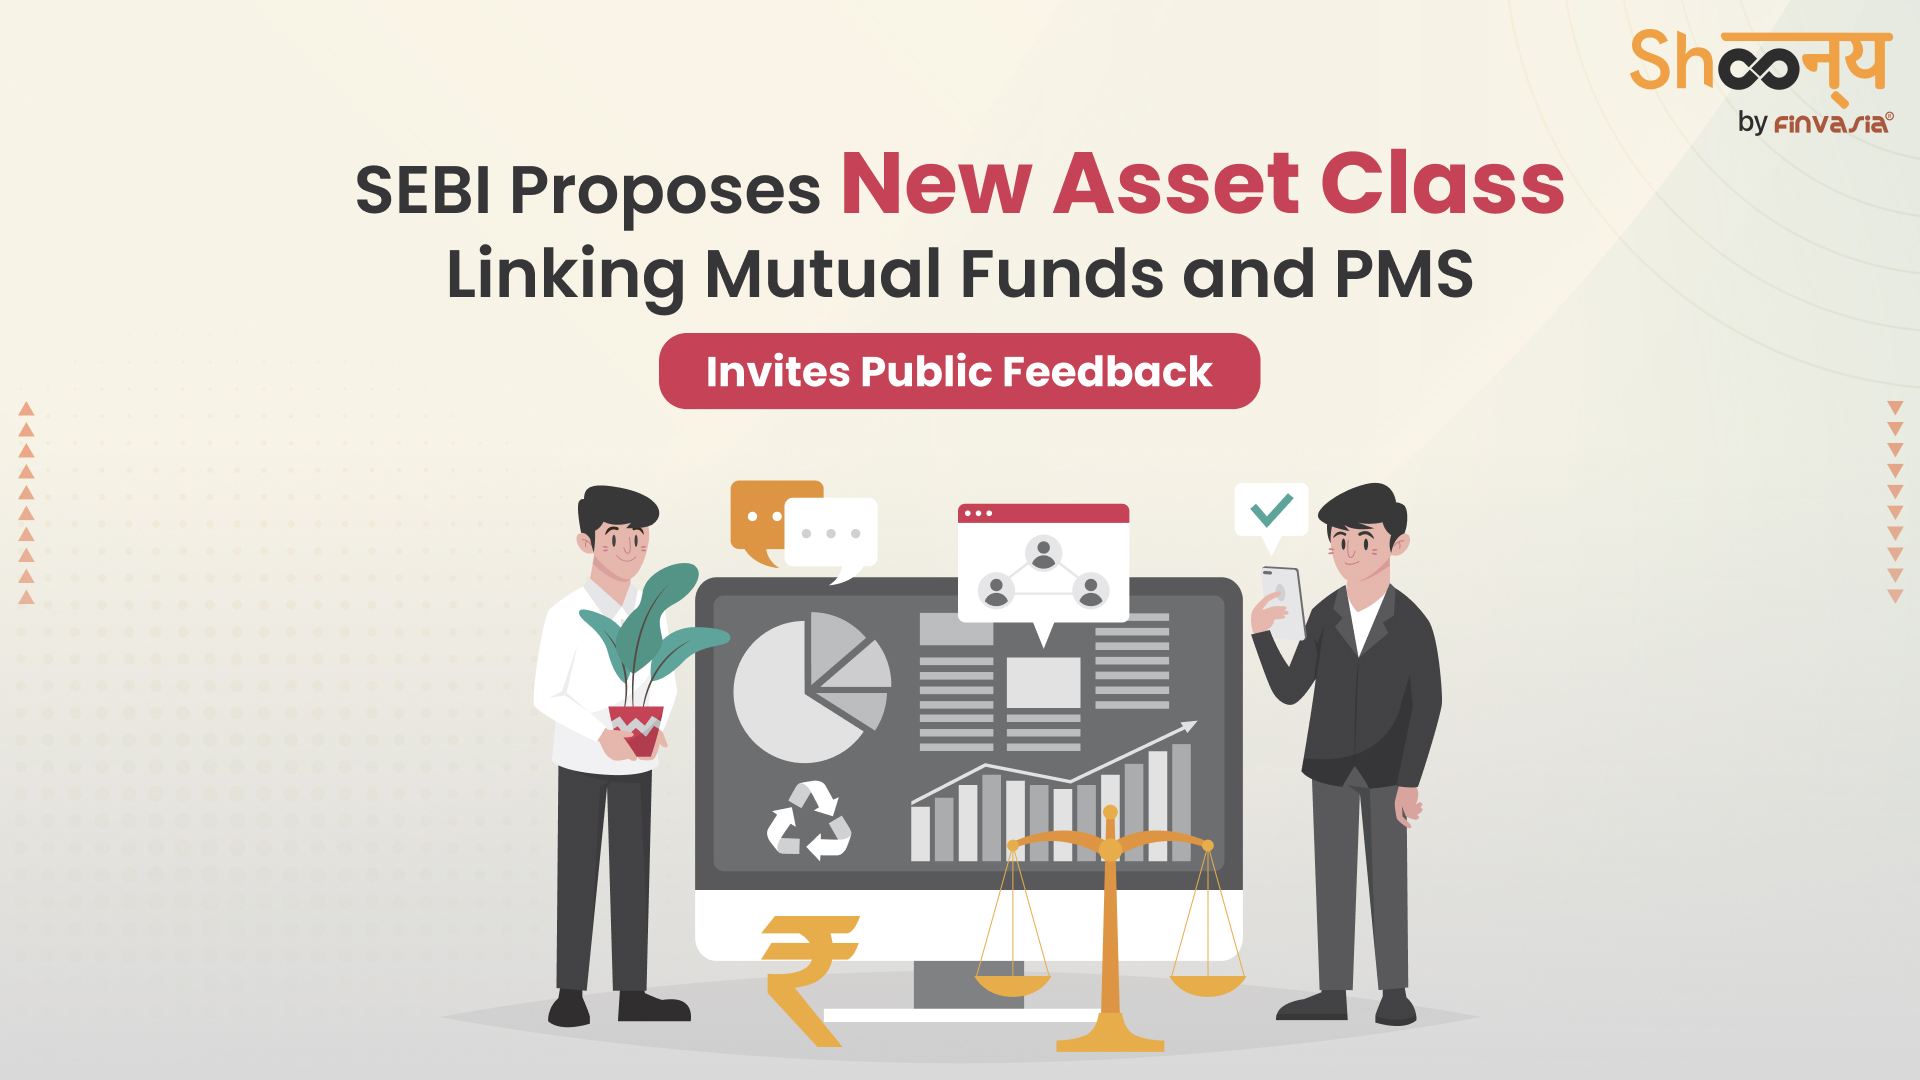 
  SEBI Proposes New Asset Class| Aims to Bridge Mutual Funds and PMS